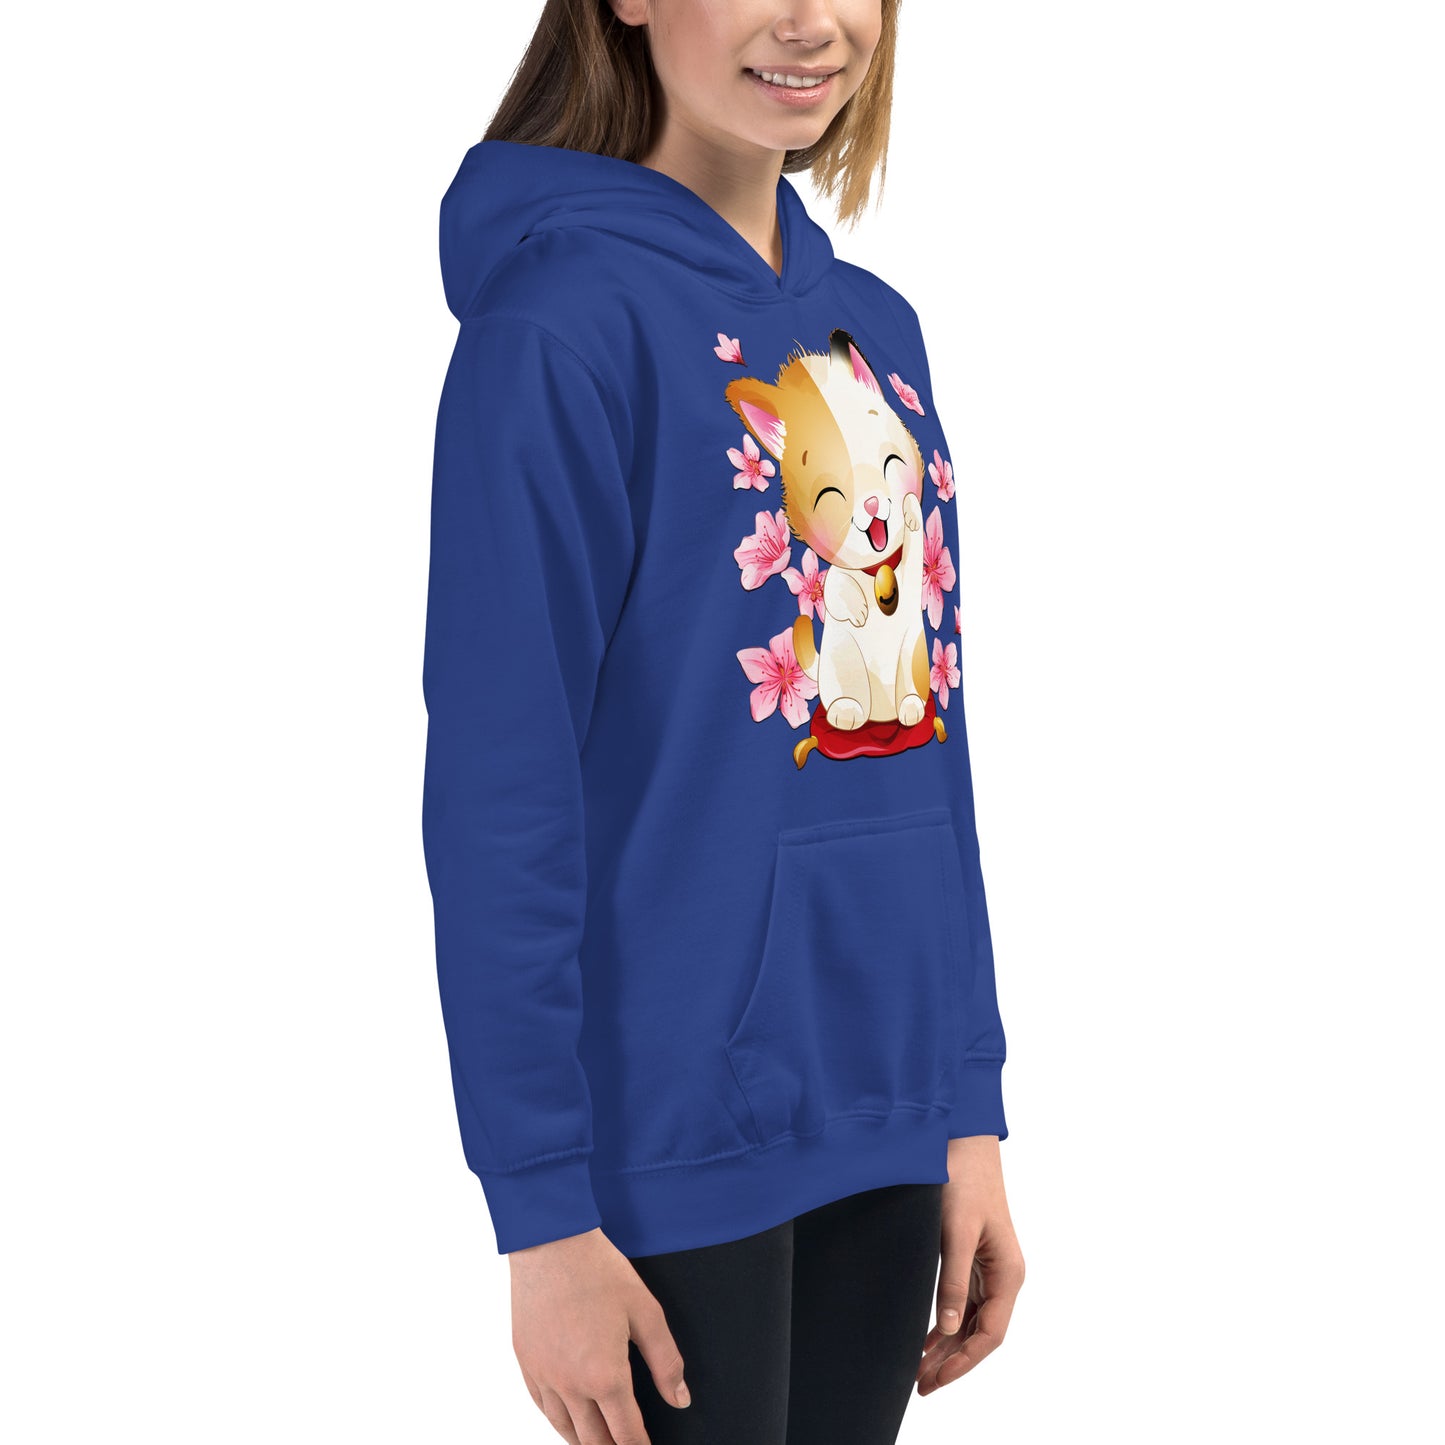 Lovely Baby Cat Hoodie, No. 0535